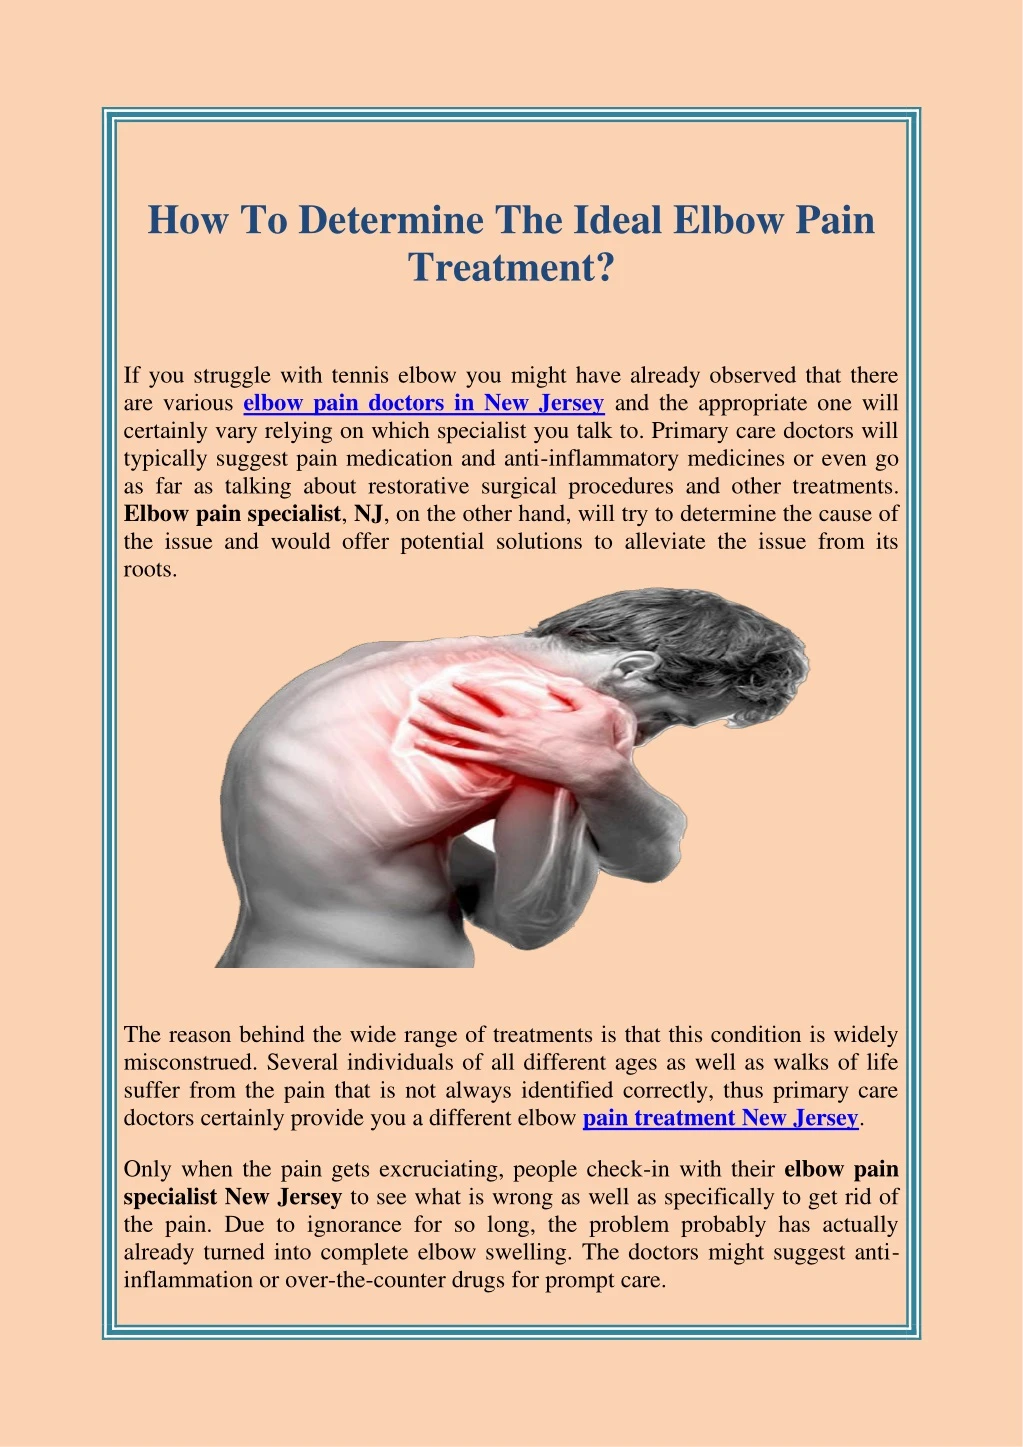 how to determine the ideal elbow pain treatment